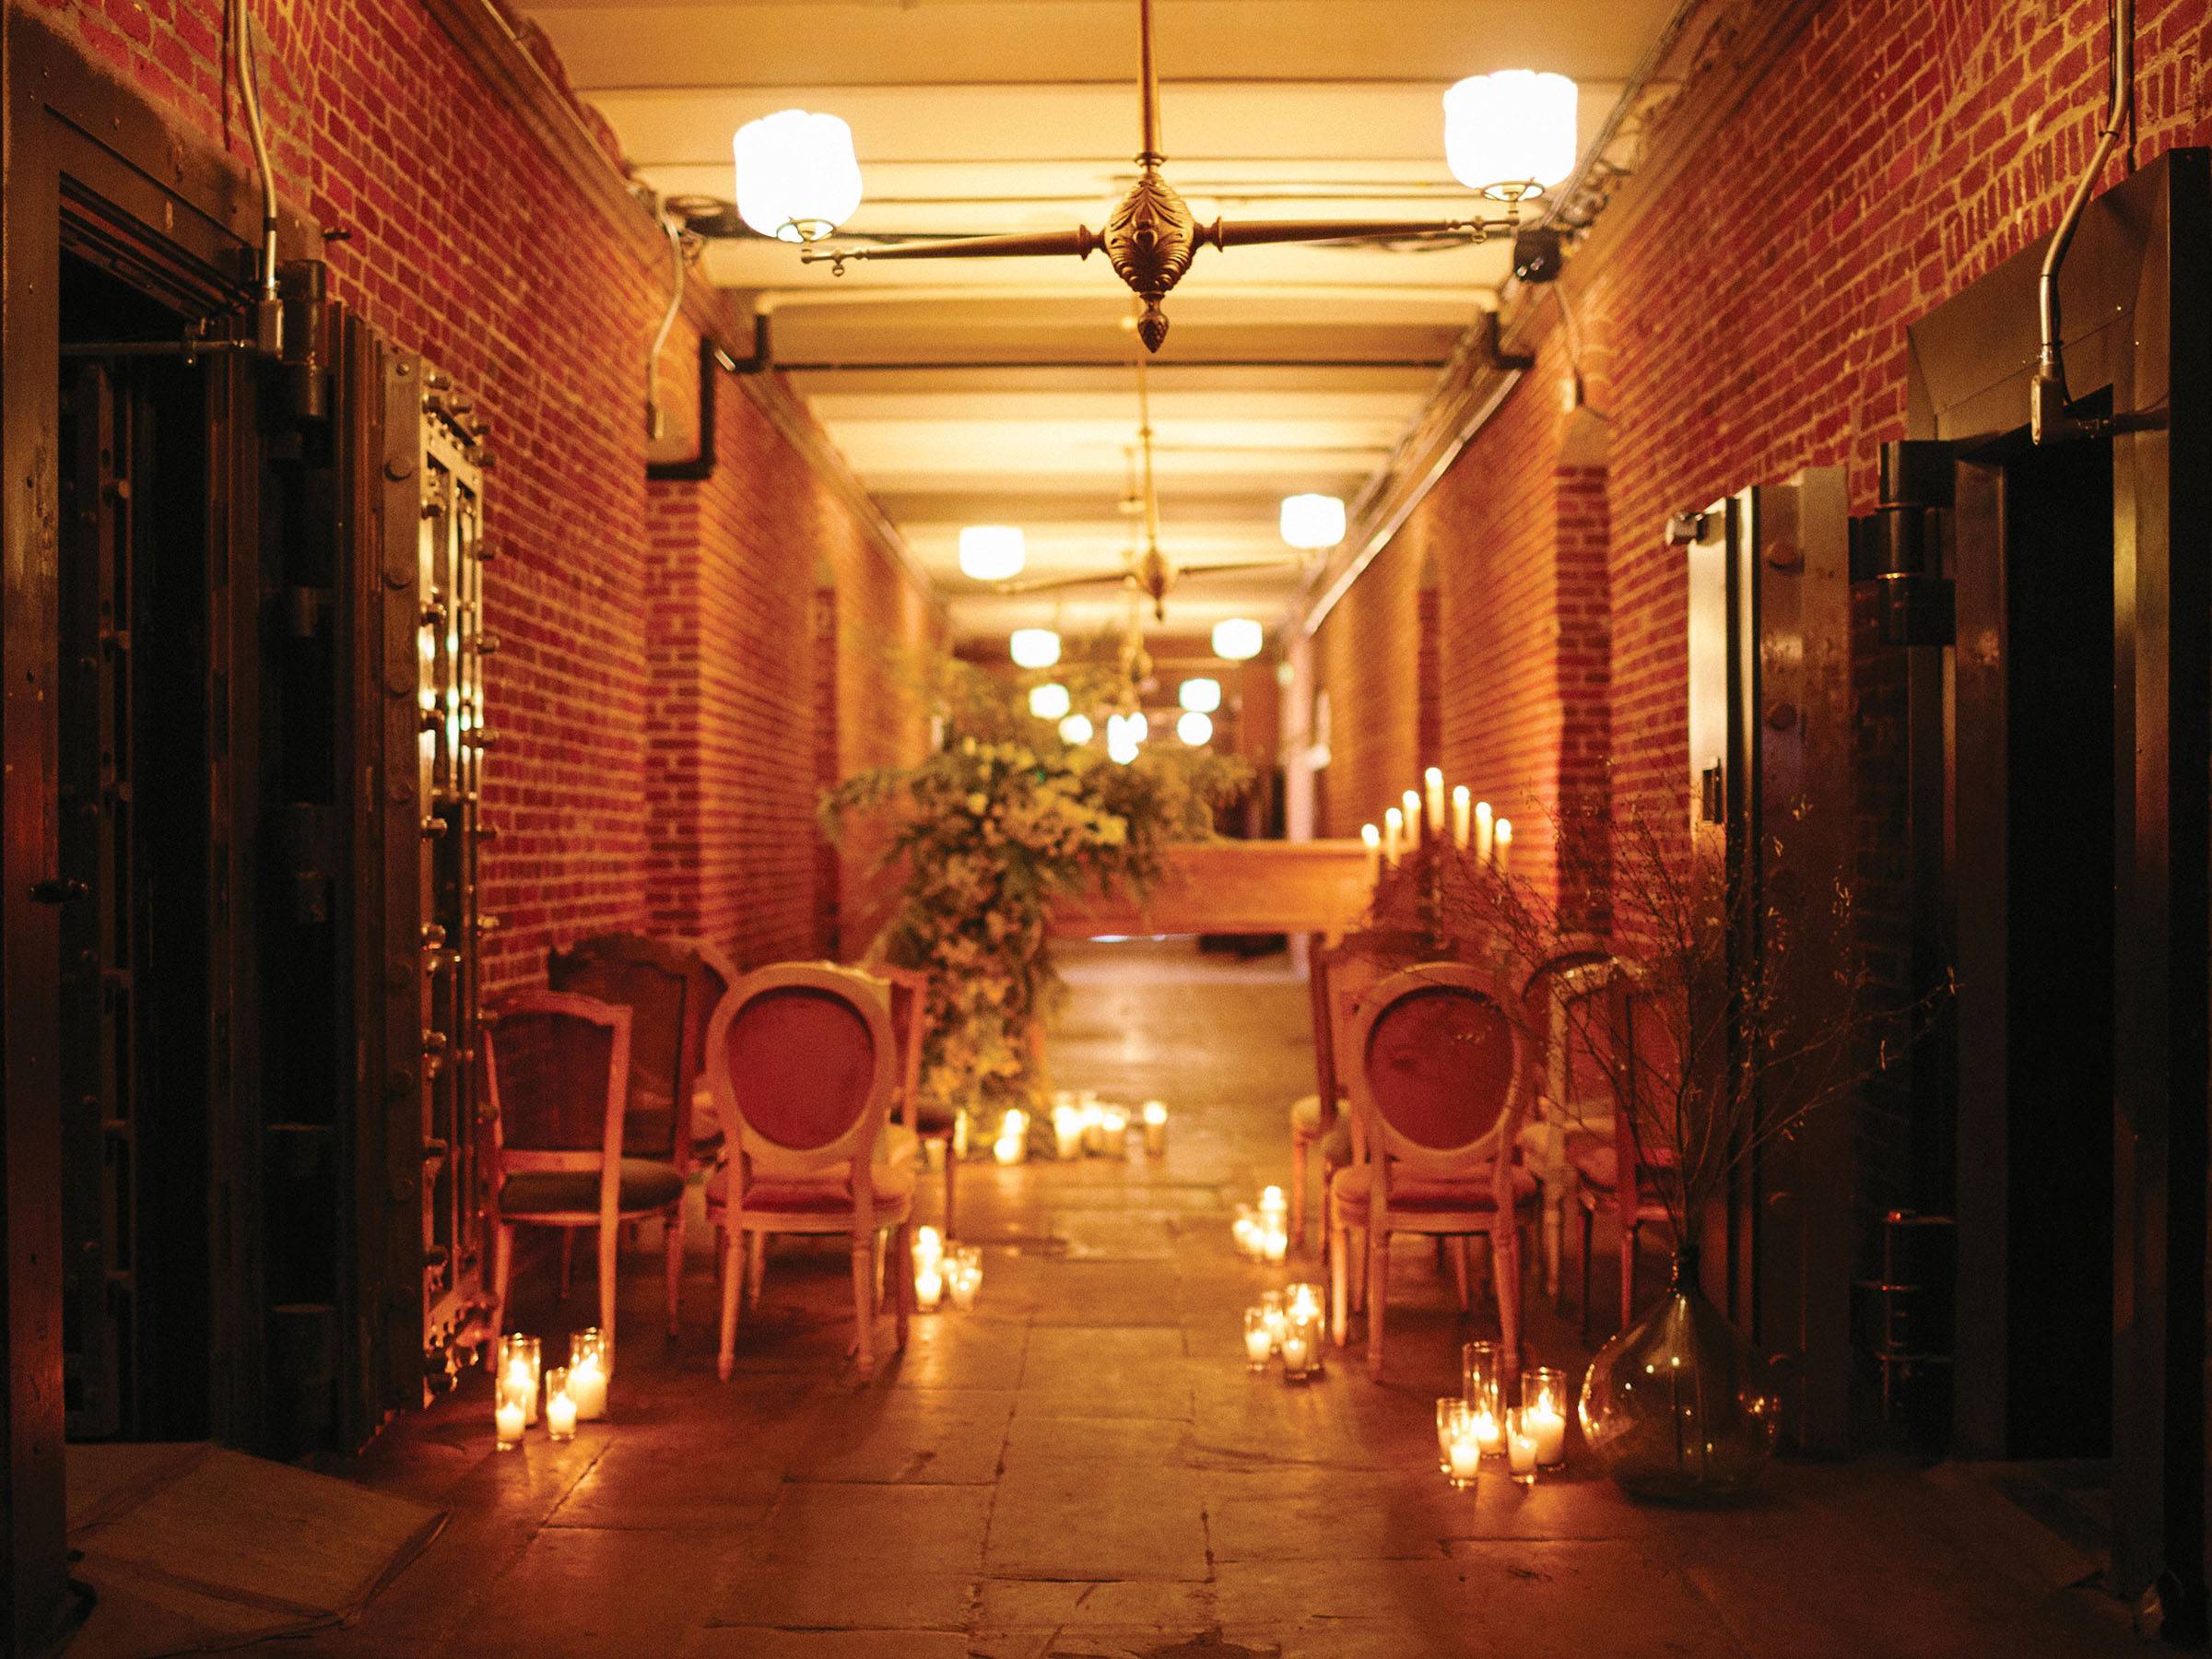 Brick corridor set-up for a ceremony with floral draped altar, seating and candles